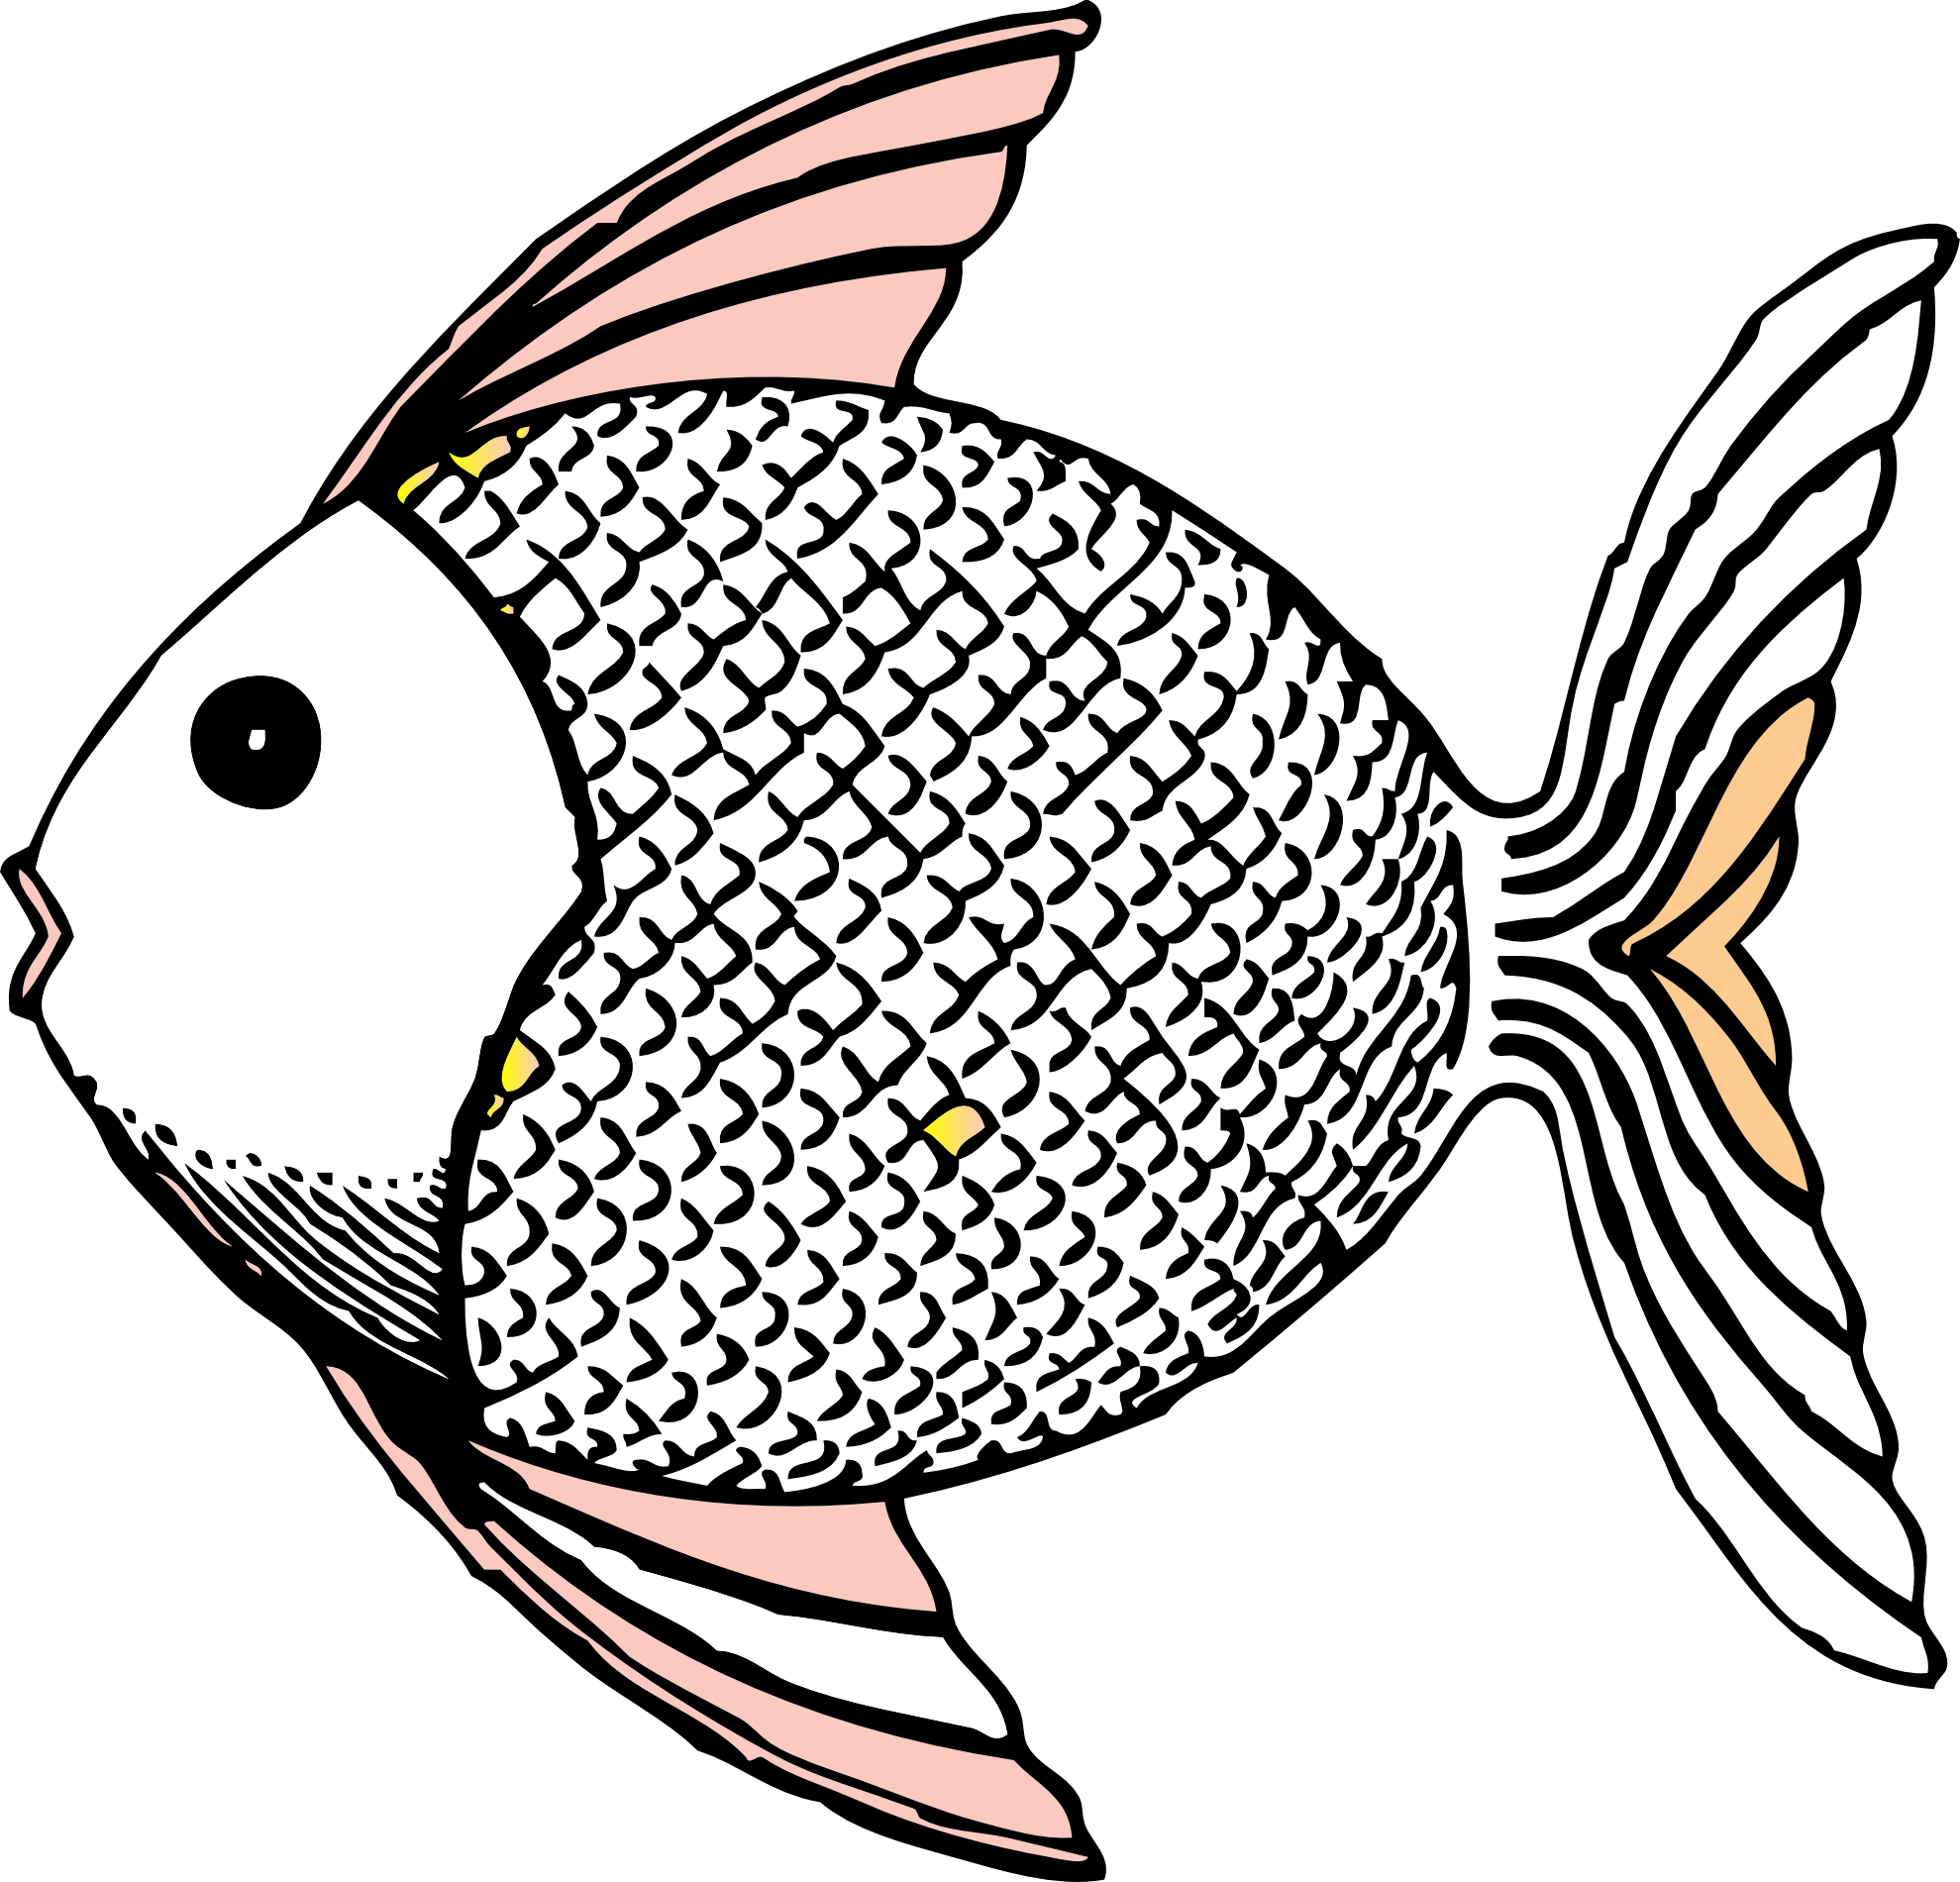 Fish Black And White Drawing - Clipart library